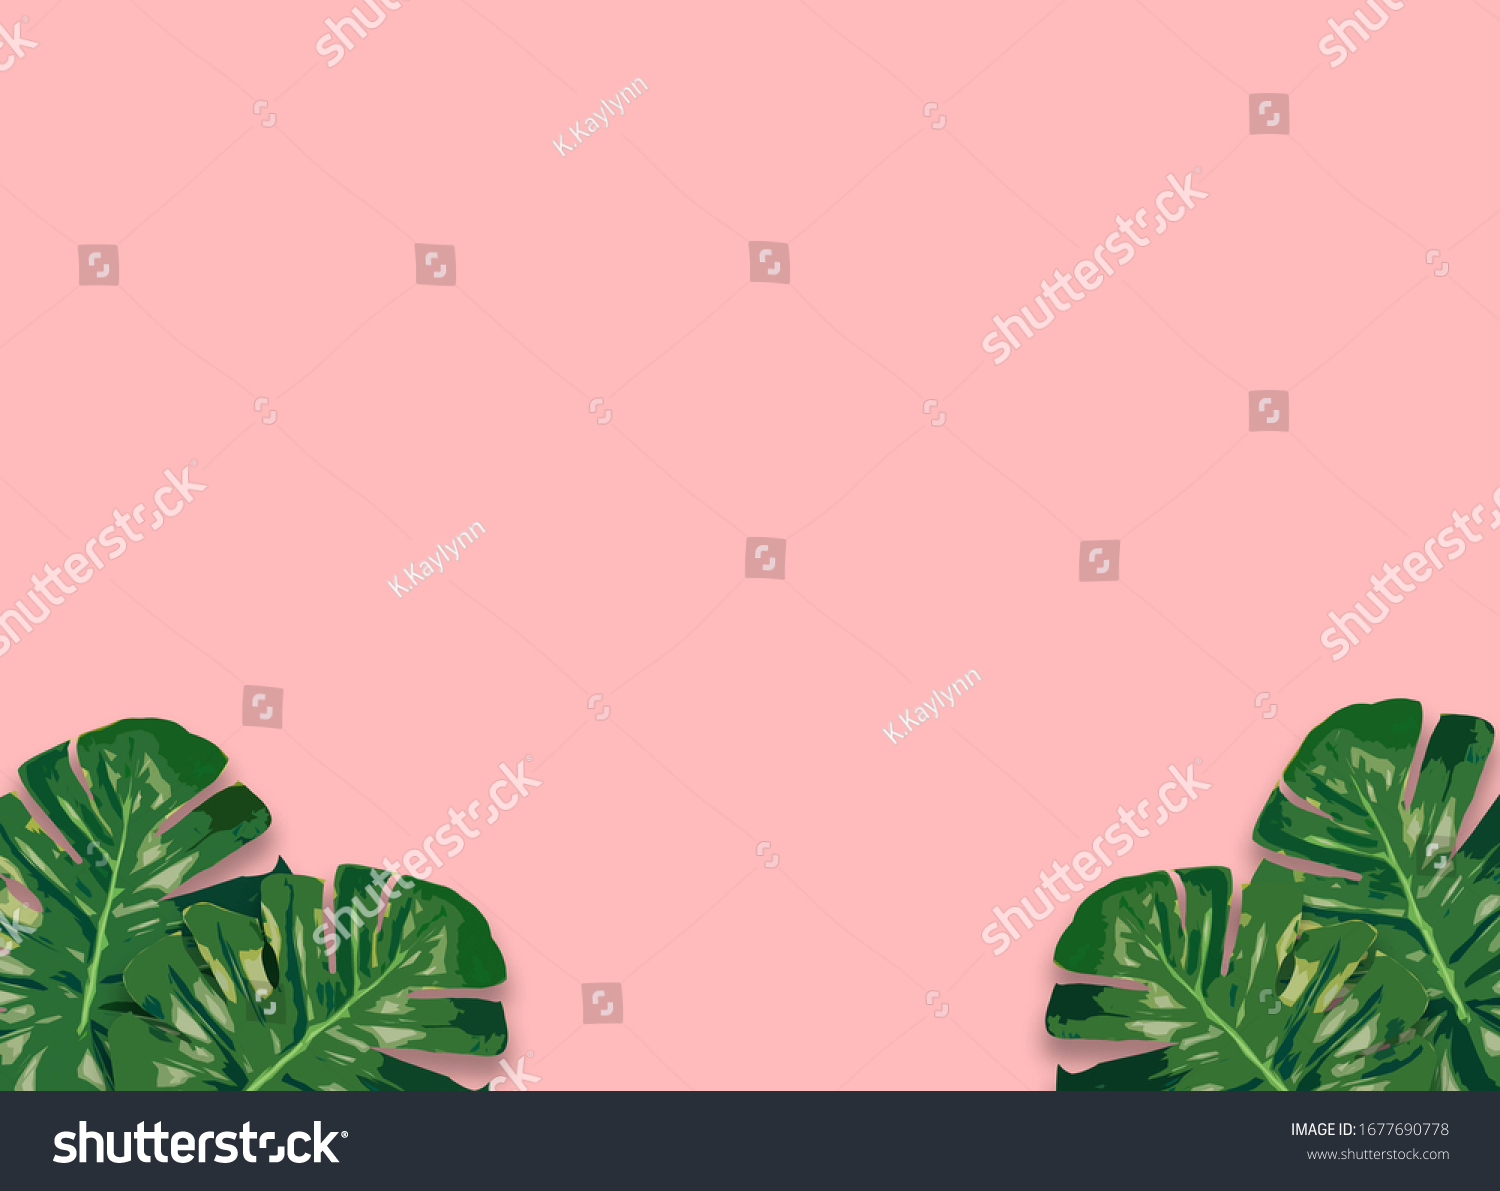 Monstera plant leaves,clipping path included.Flat lay, top view #1677690778